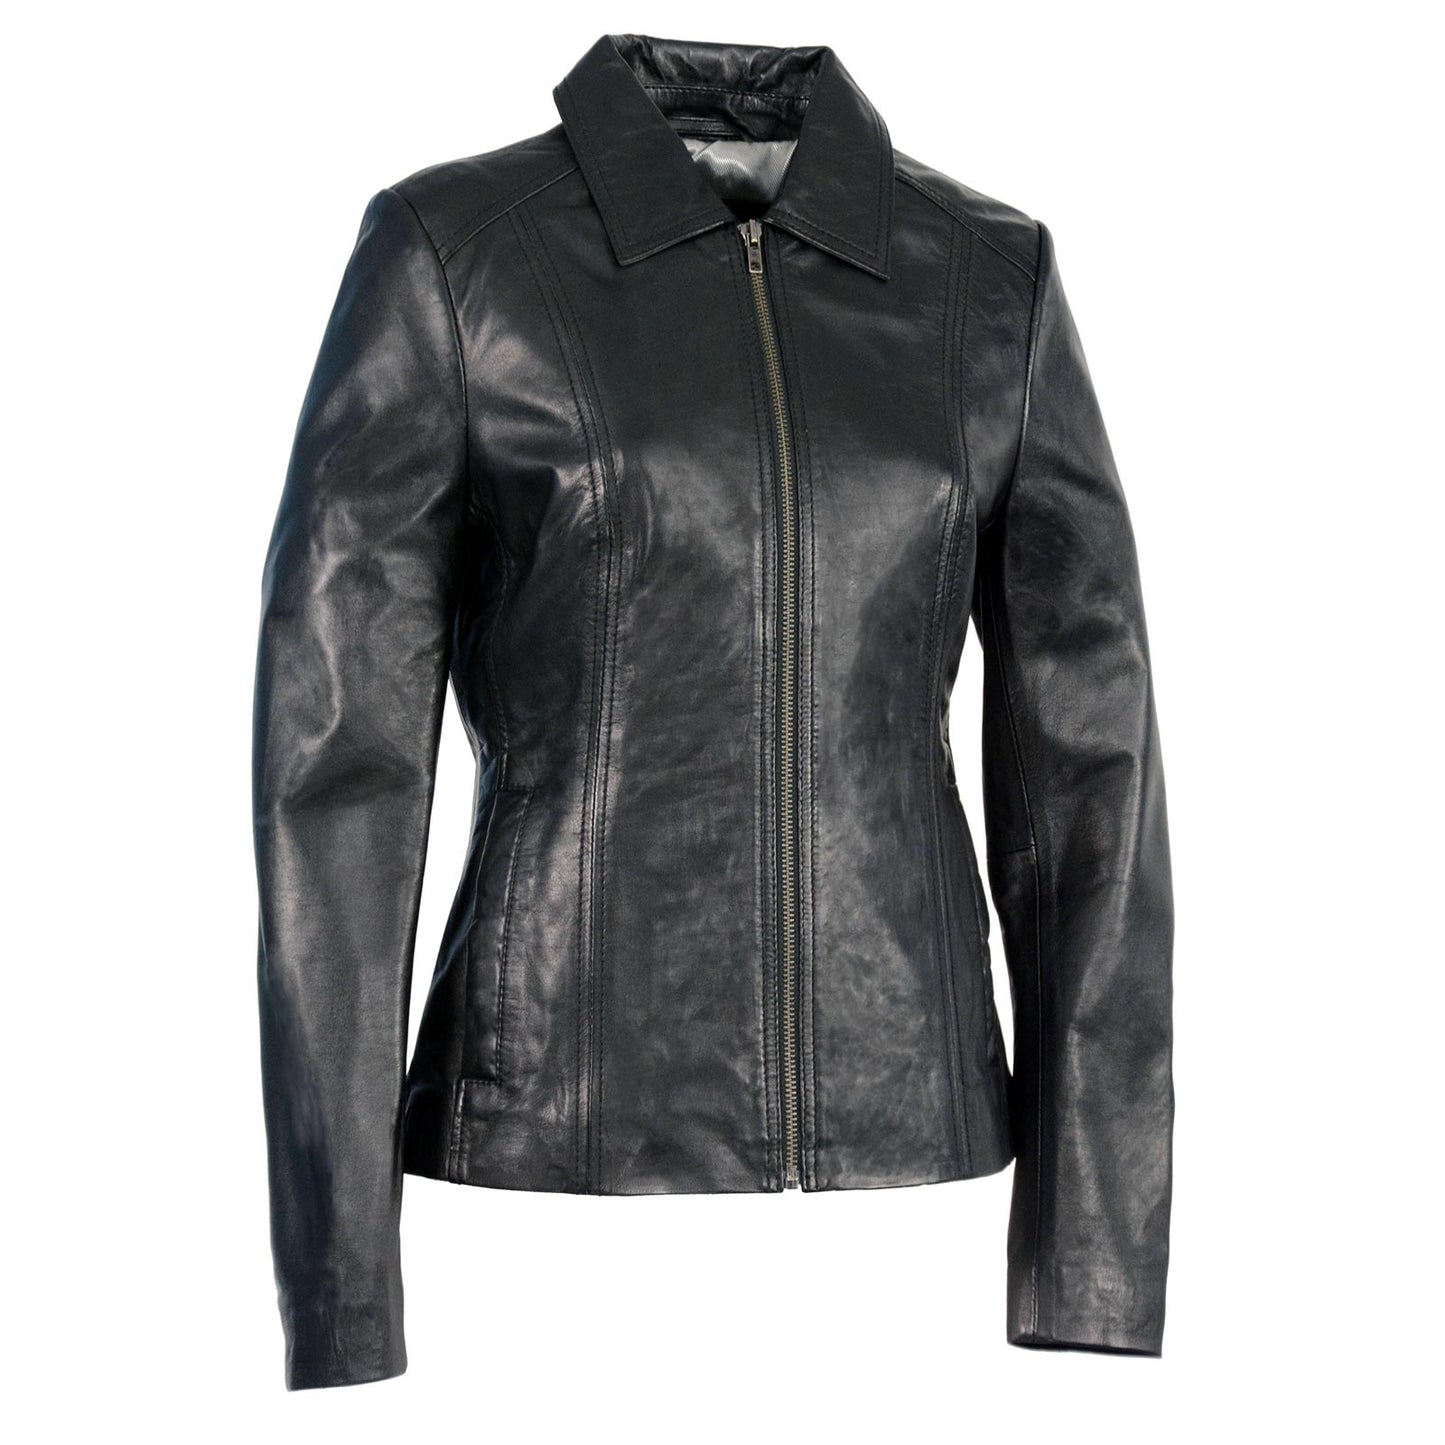 Milwaukee Leather SFL2850 Women's Classic Black Zippered Motorcycle Style Fashion Leather Jacket with Shirt Style Collar